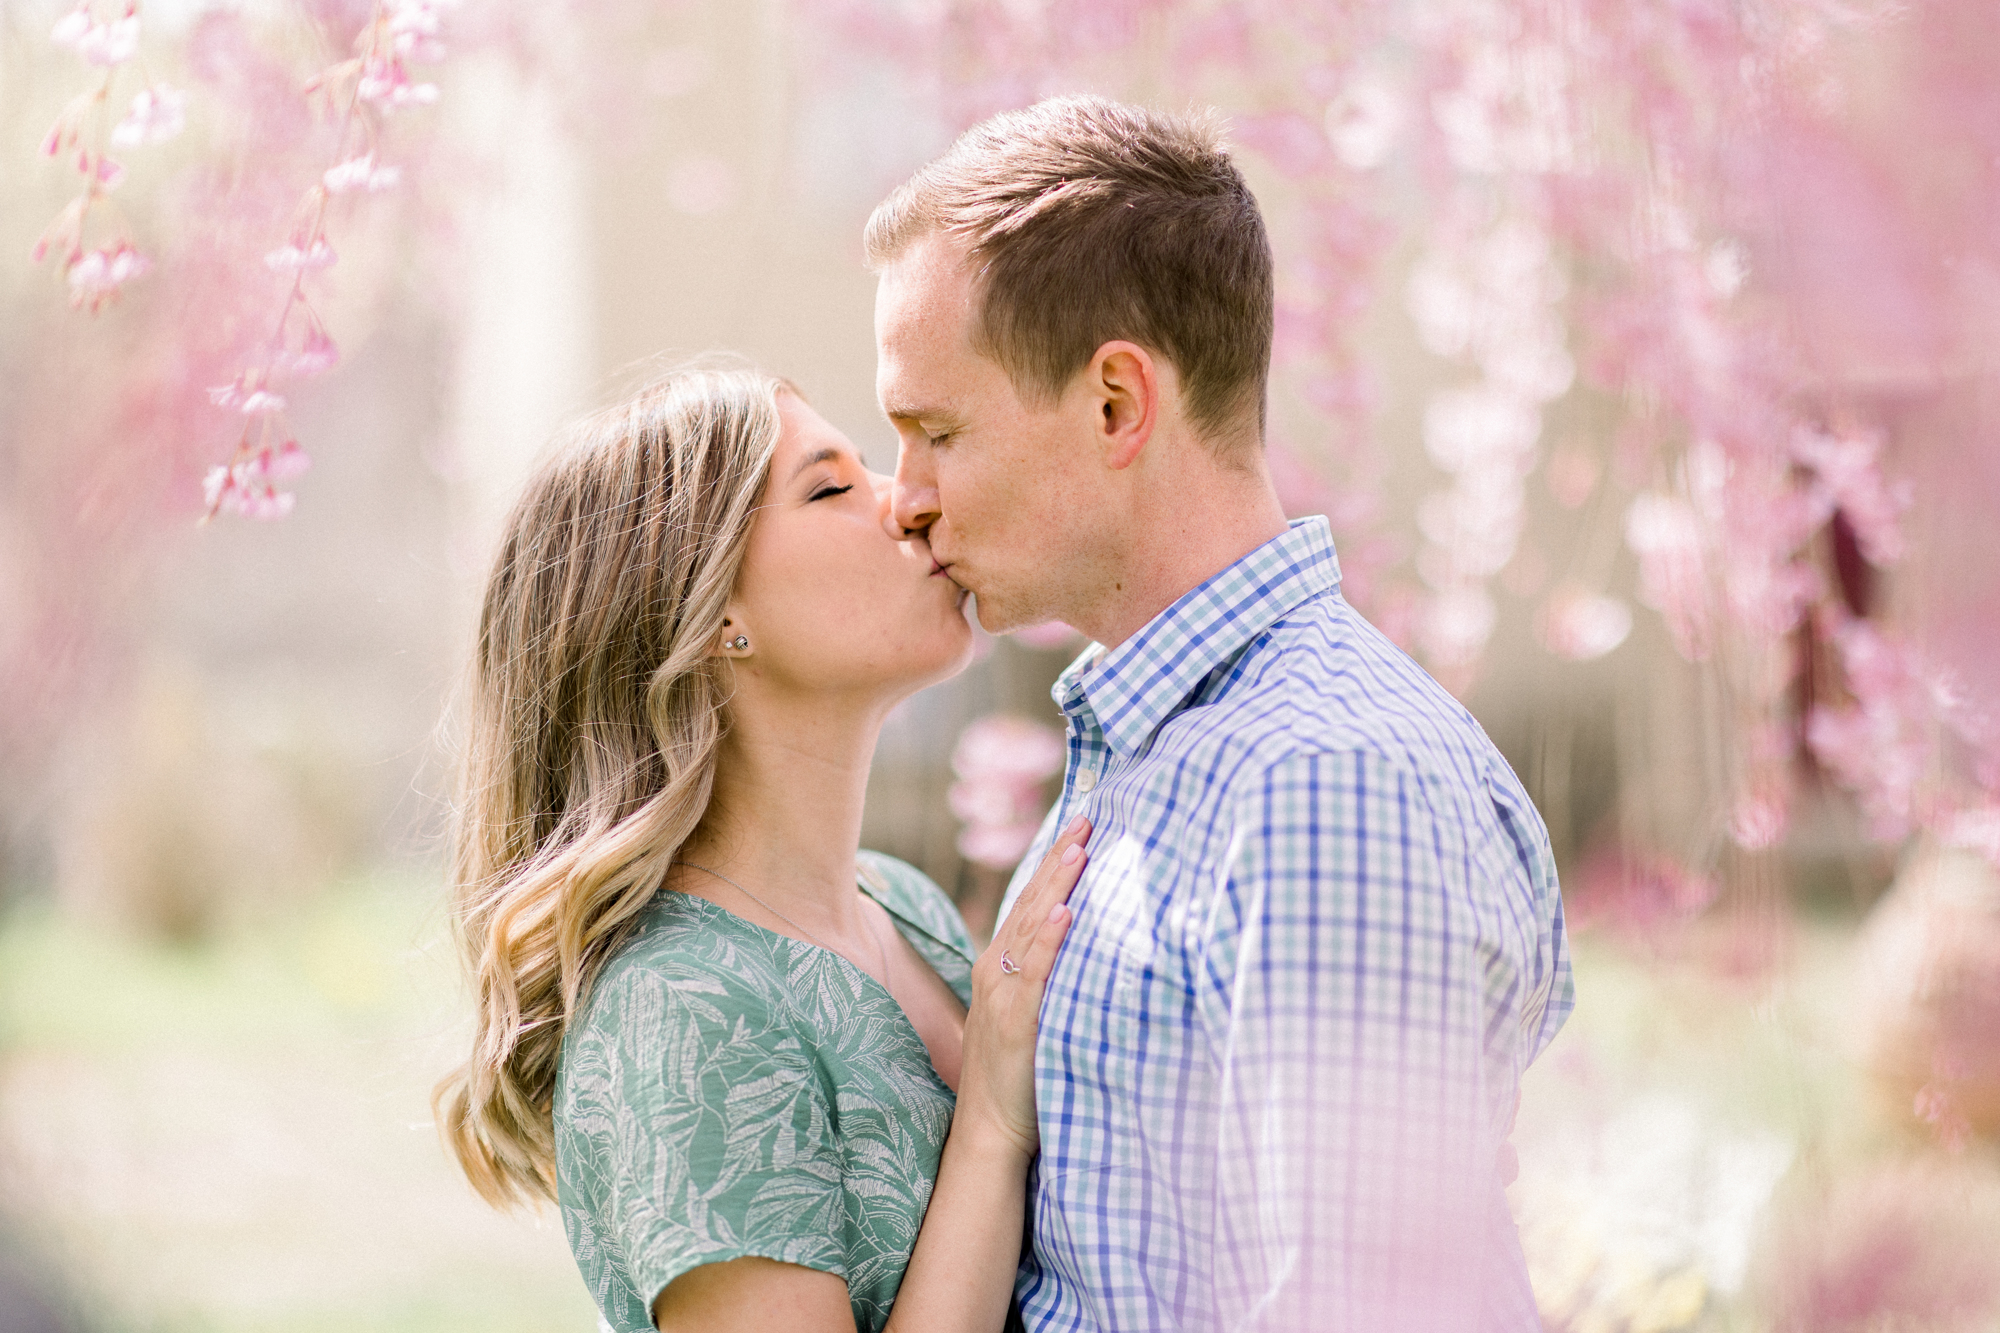 Artistic New York Engagement Photography with Spring Blossoms